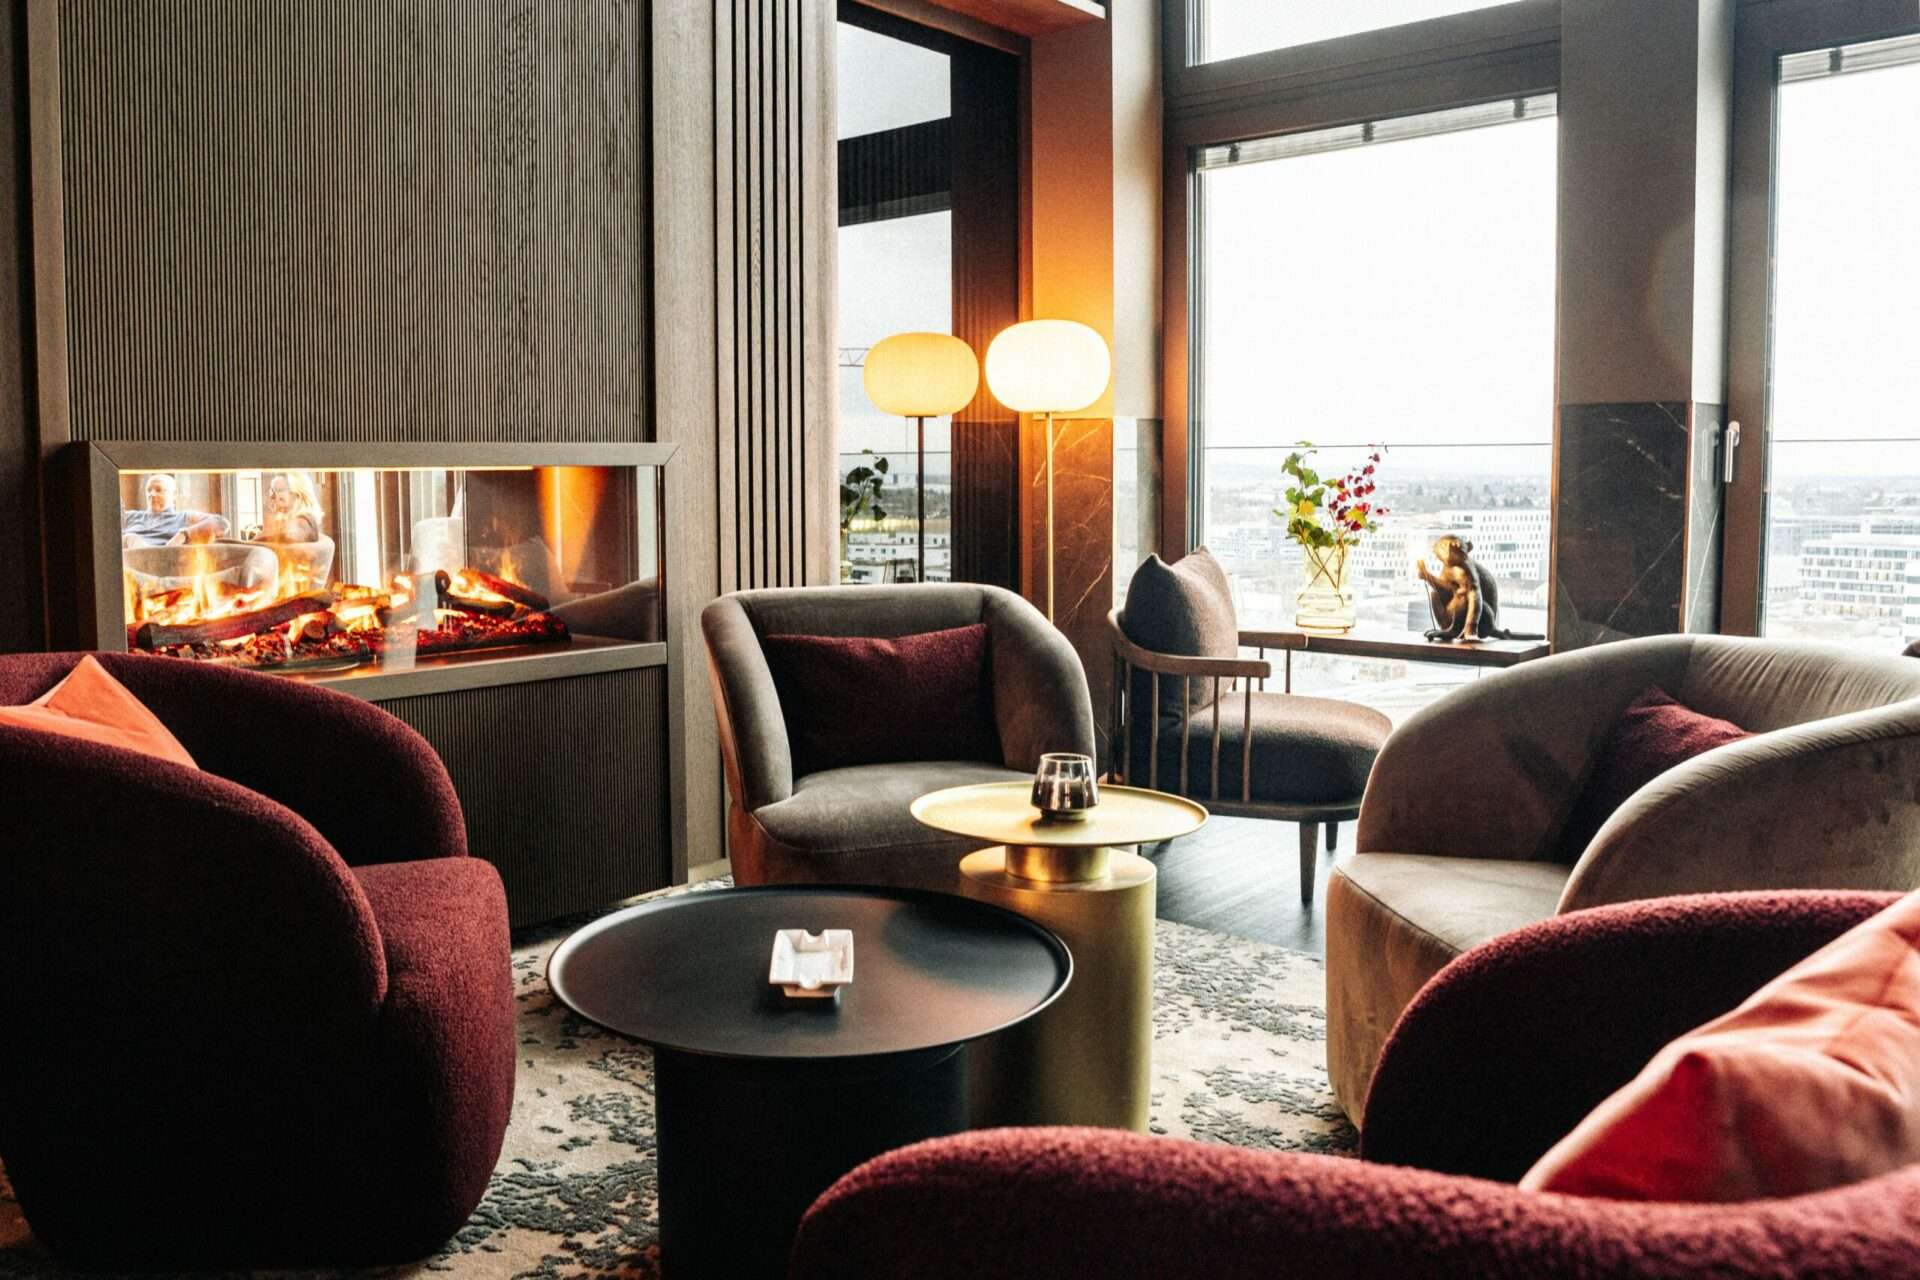 Stools around a small table in front of the fireplace of the 15 High Bar with a view of the city from the window